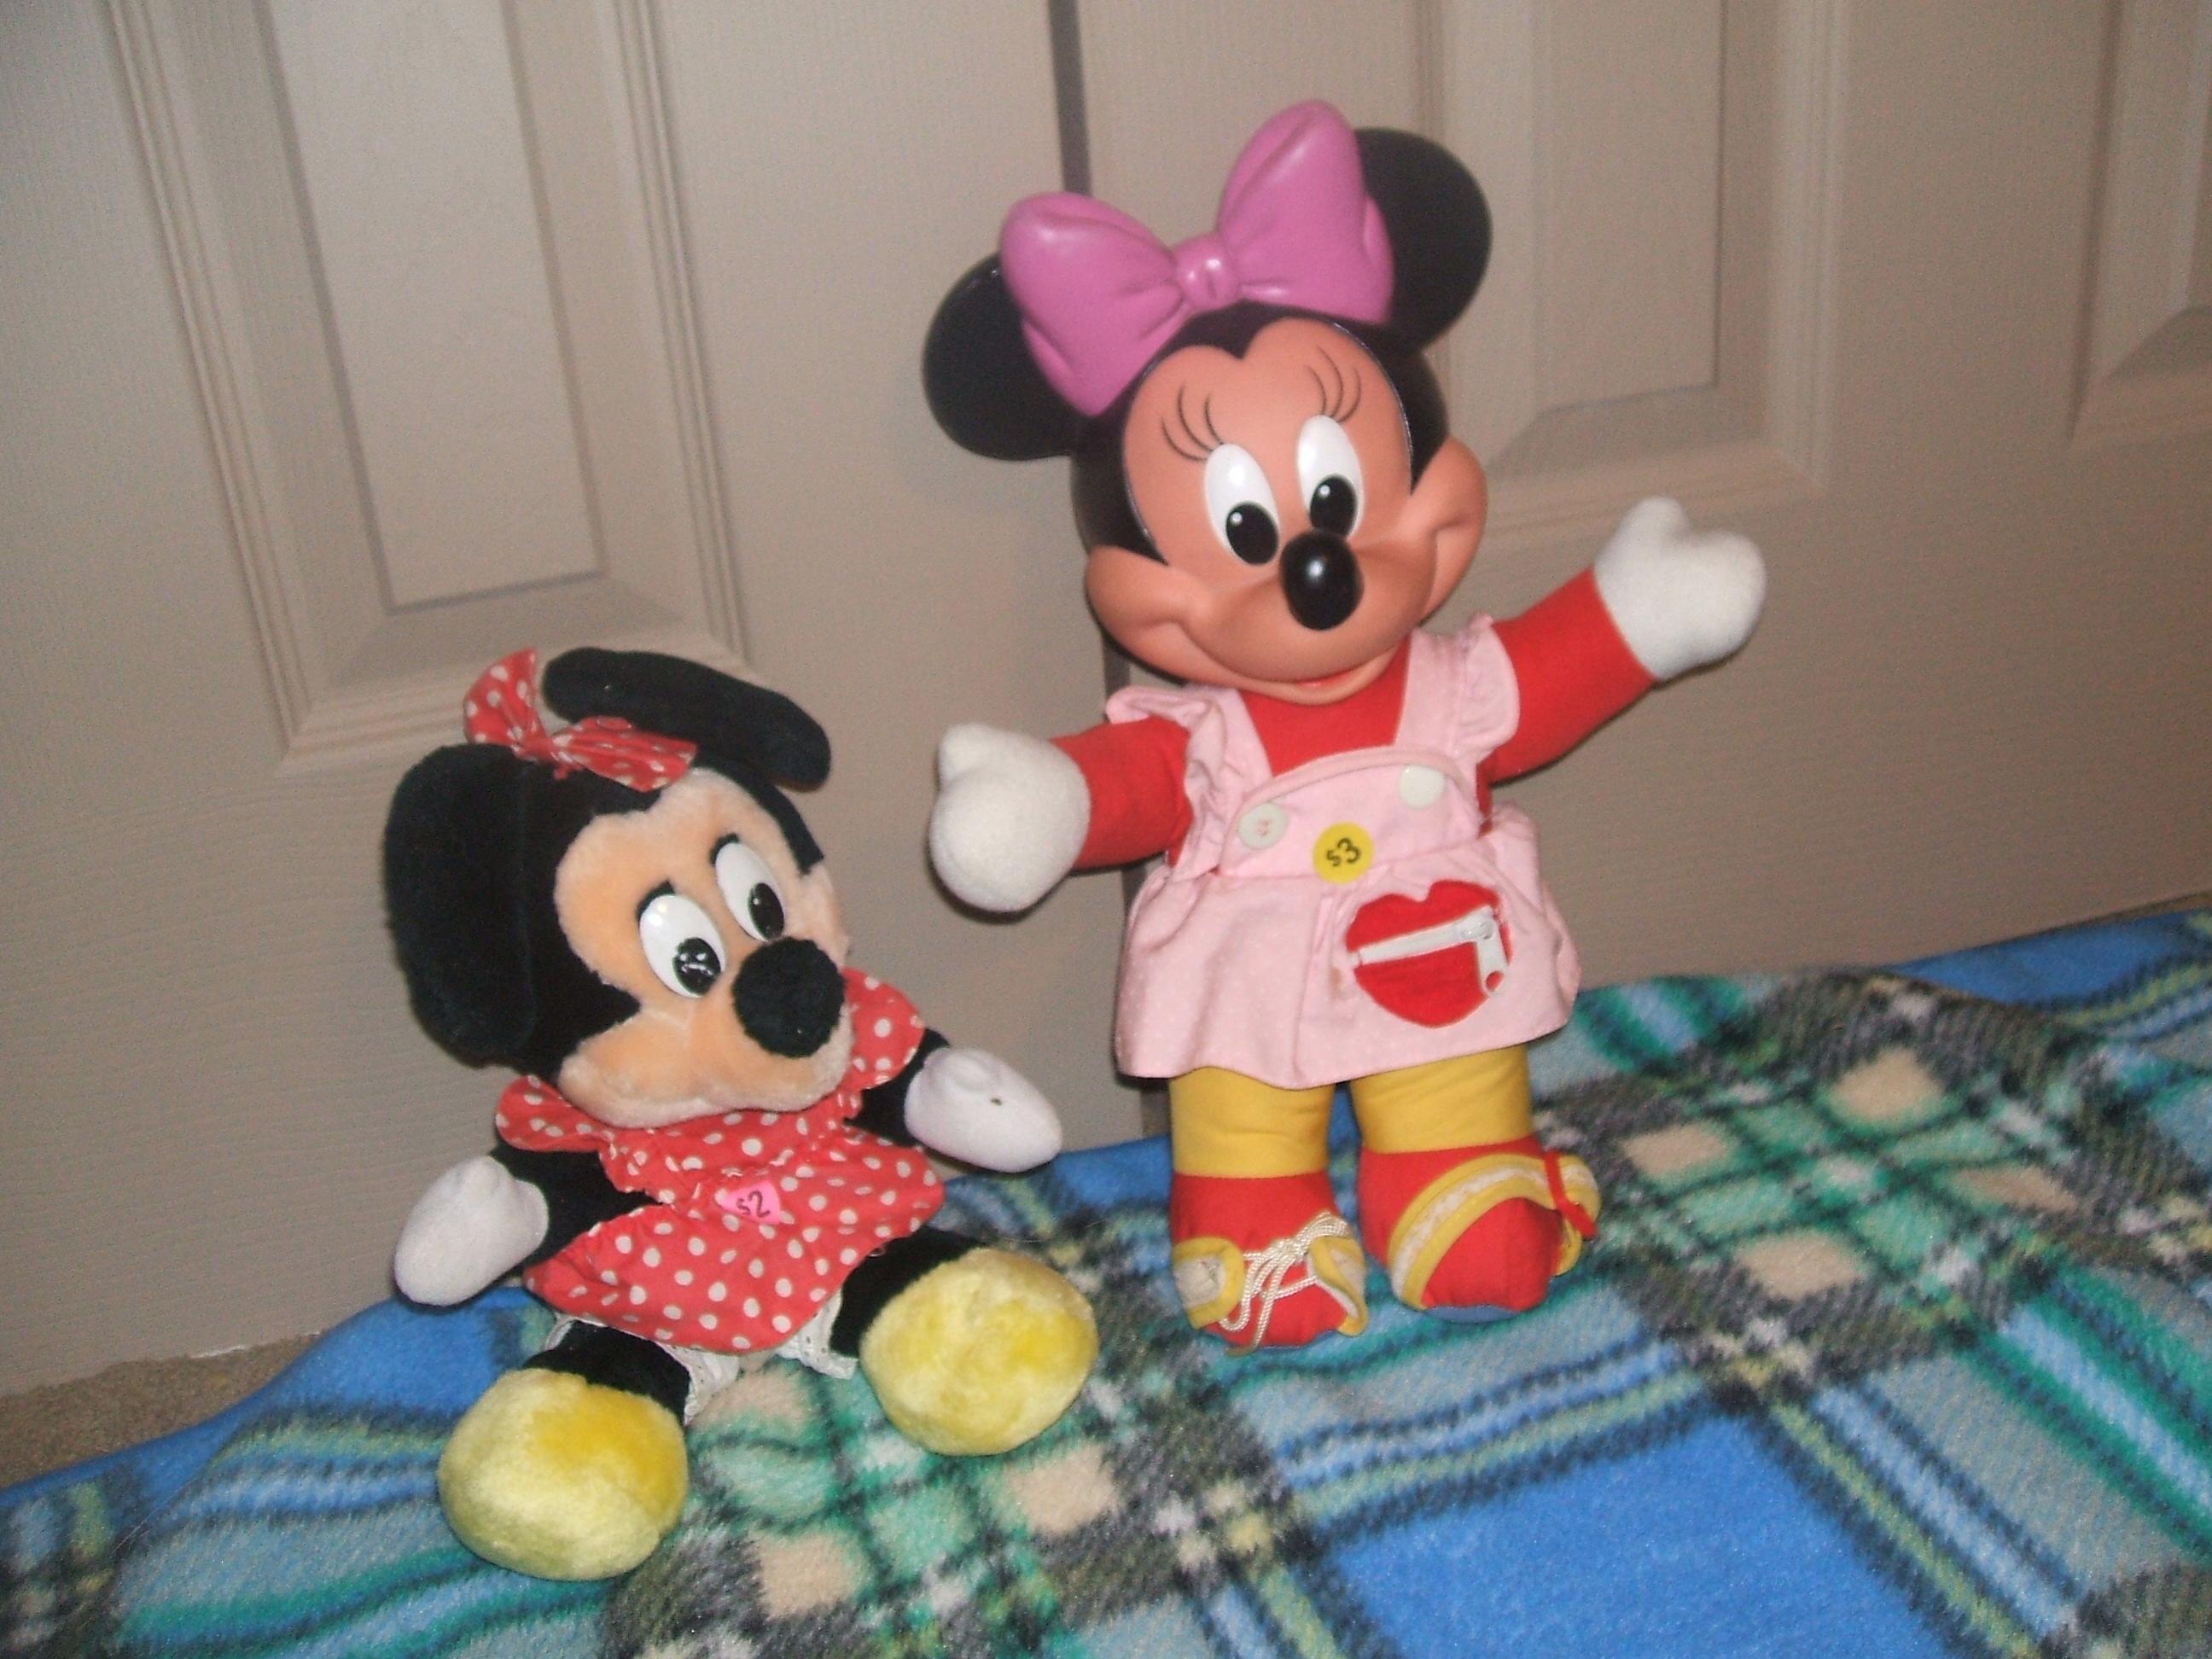 TWO DARLING LITTLE MINIE MOUSE A GREAT GIFT I